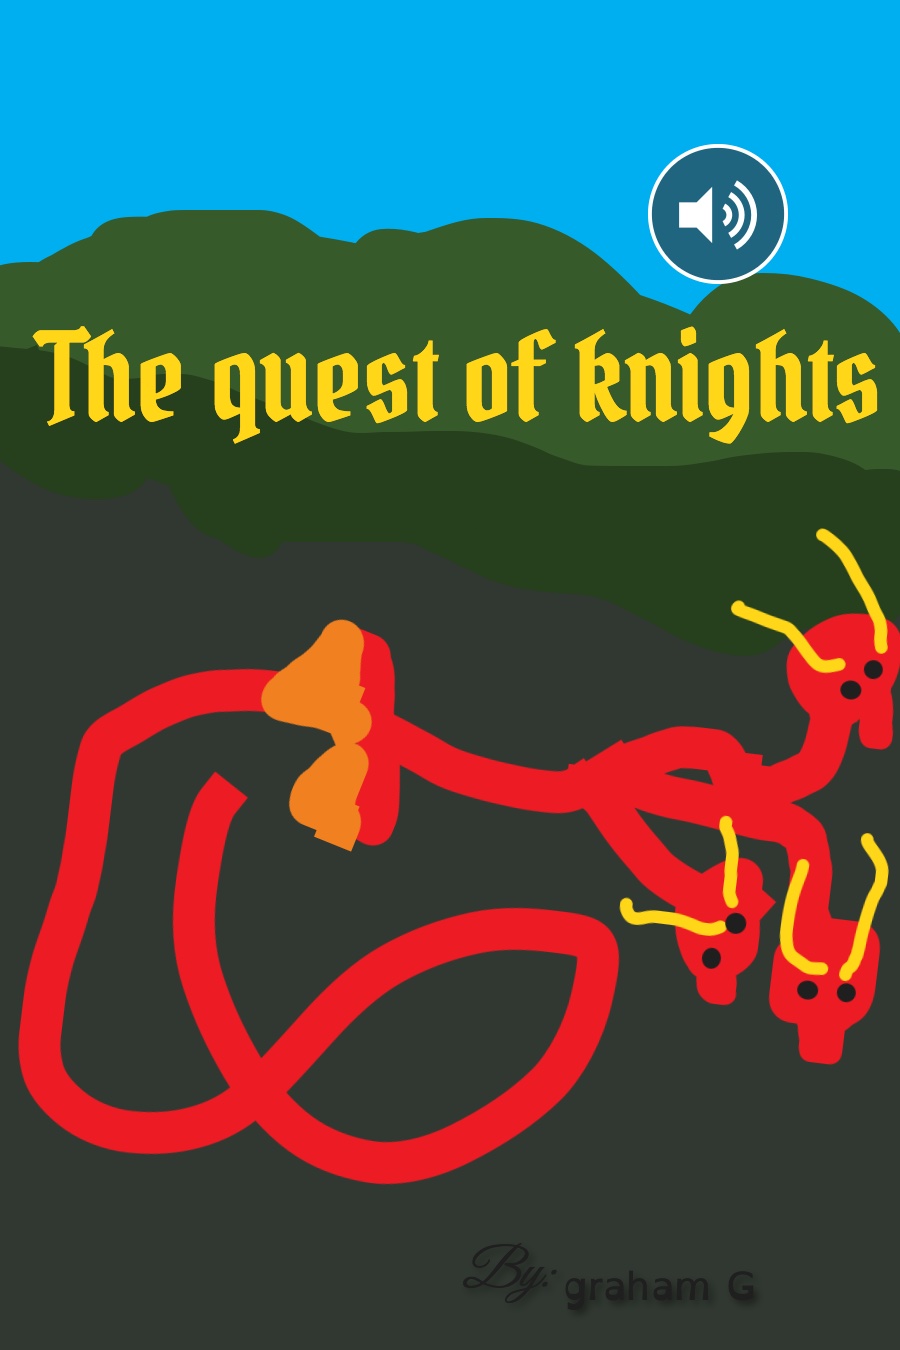 The quest of knights